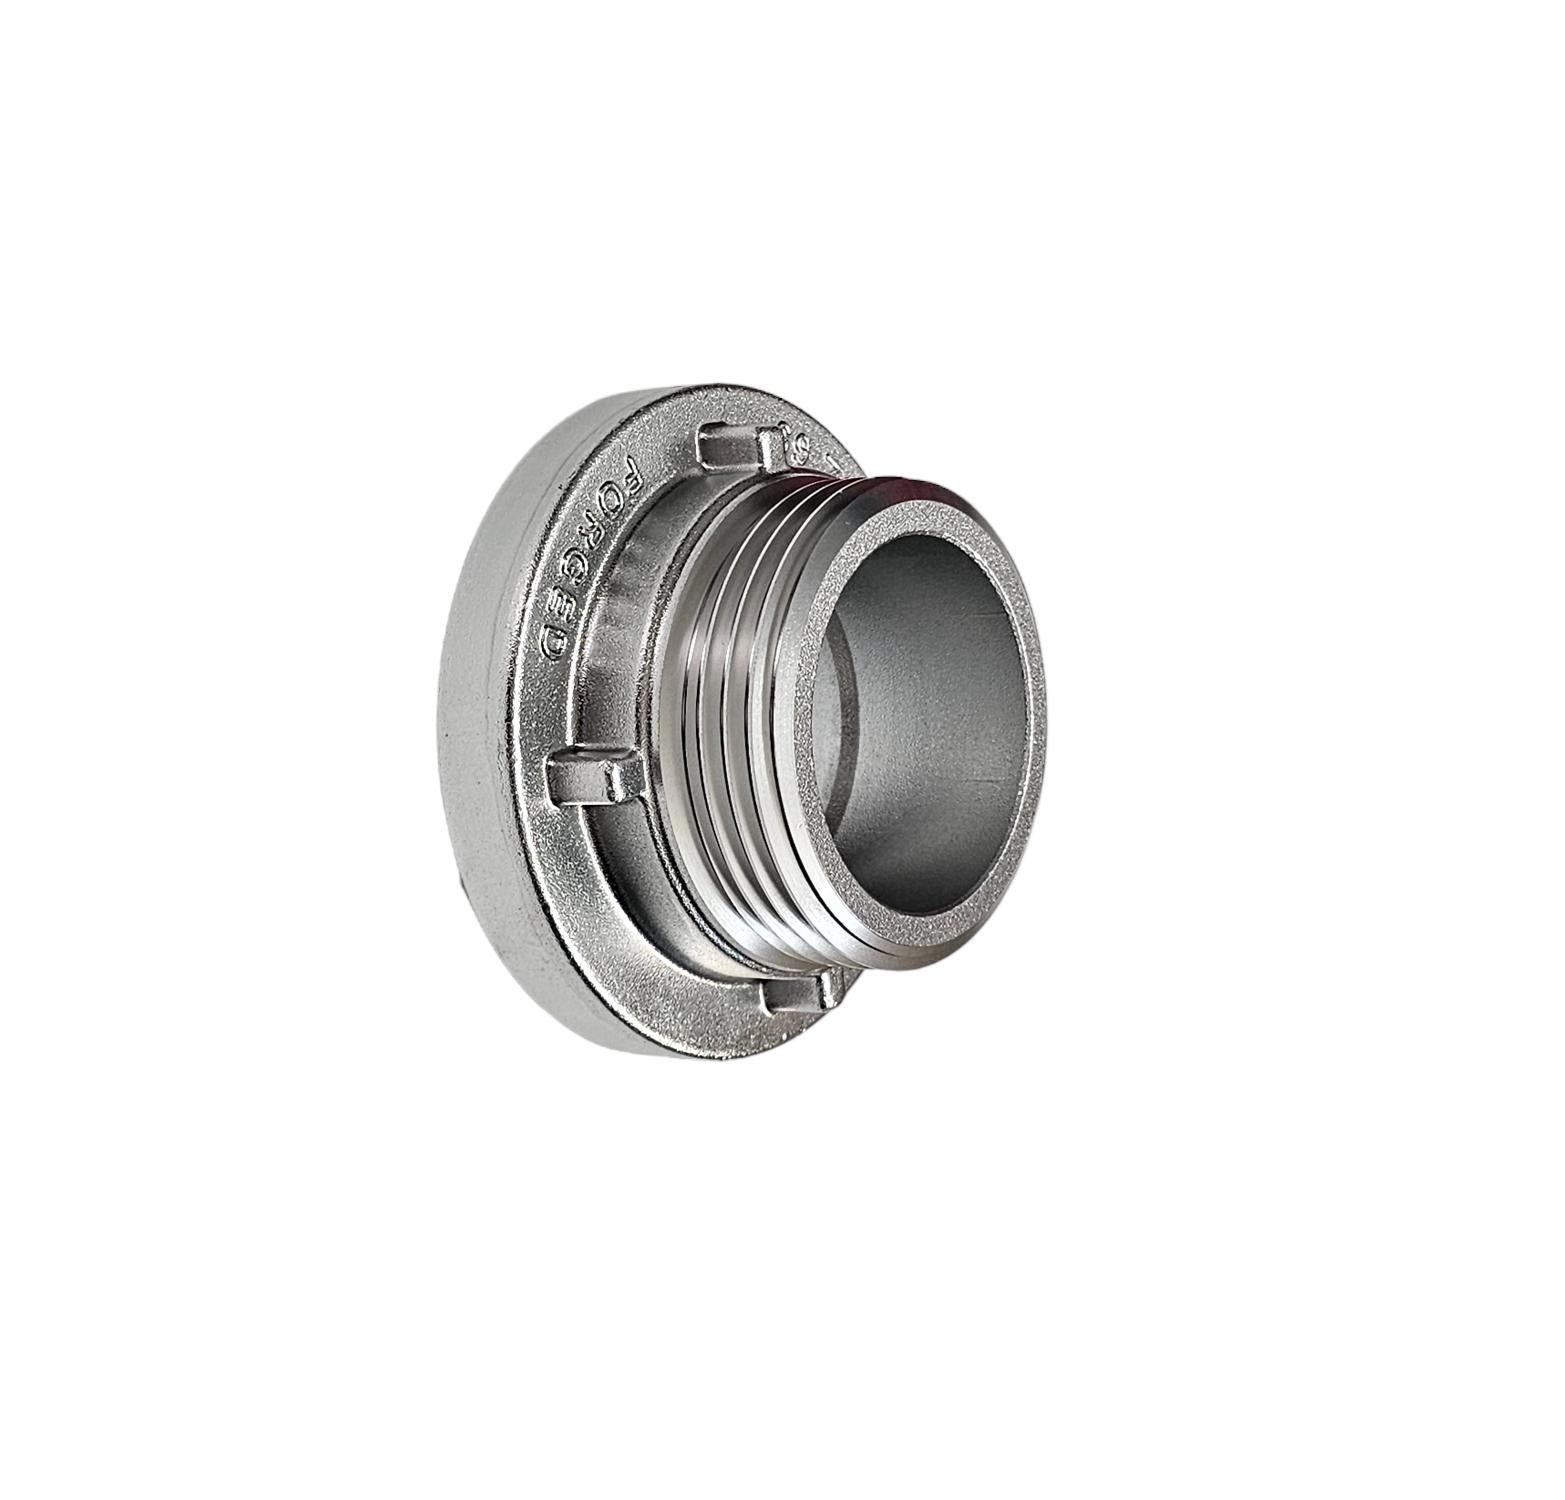 64mm MFB male forged storz adaptor - Premium  from Wolf - Shop now at Firebox Australia